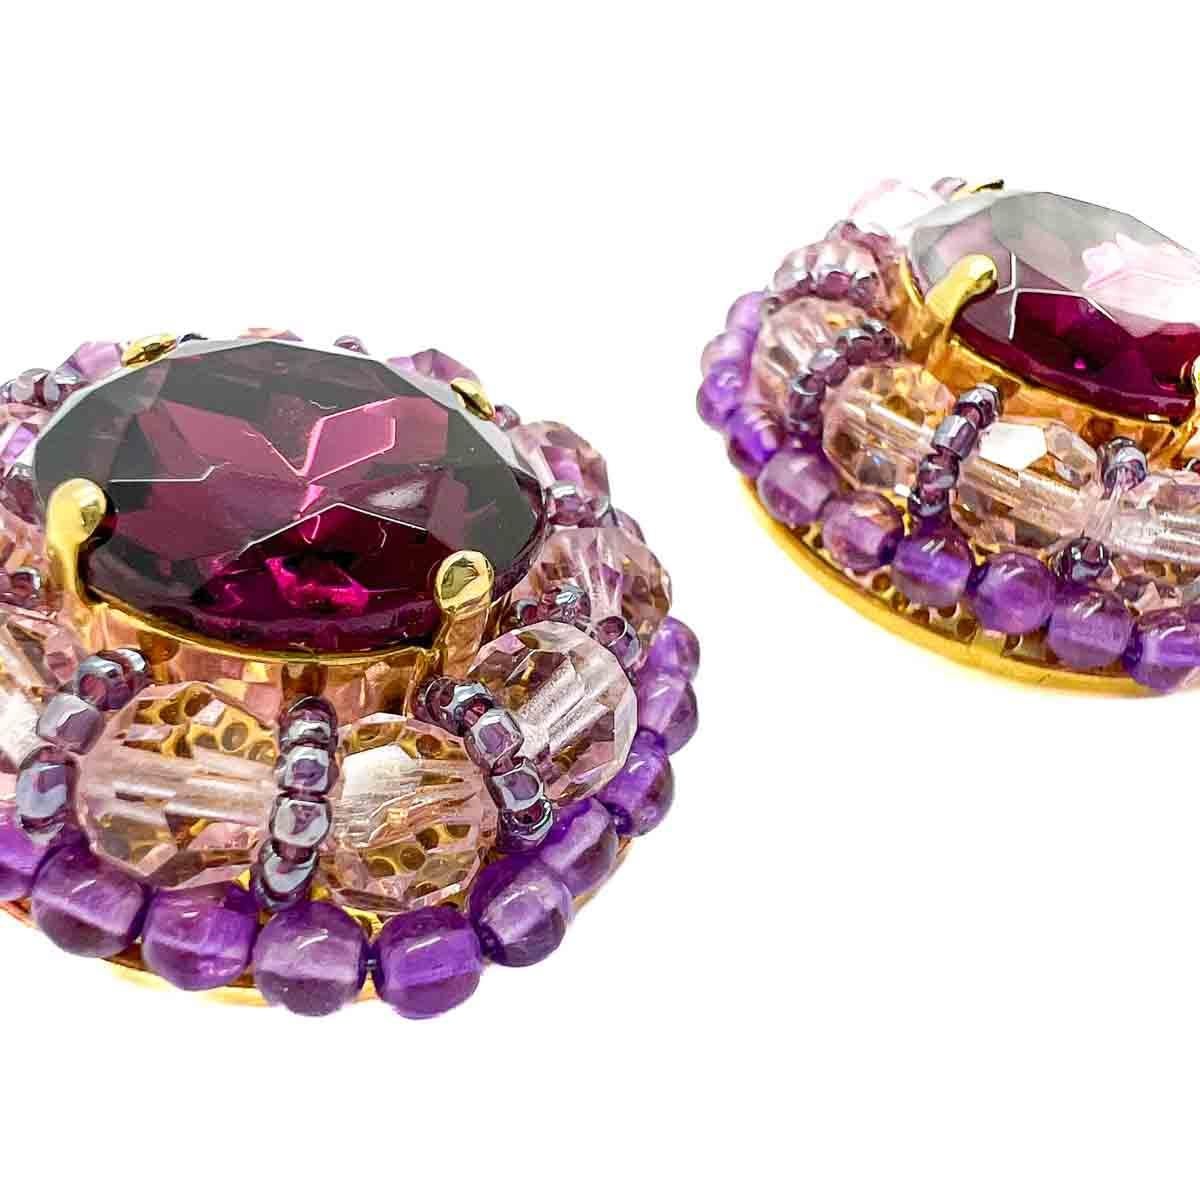 A pair of Vintage Grand Amethyst Crystal Earrings. Lavishly large, the earrings are a stone rich design. A large amethyst crystal is galleried by pale pink and pale amethyst beads in an elaborate design. Wonderfully dramatic yet oh so pretty and